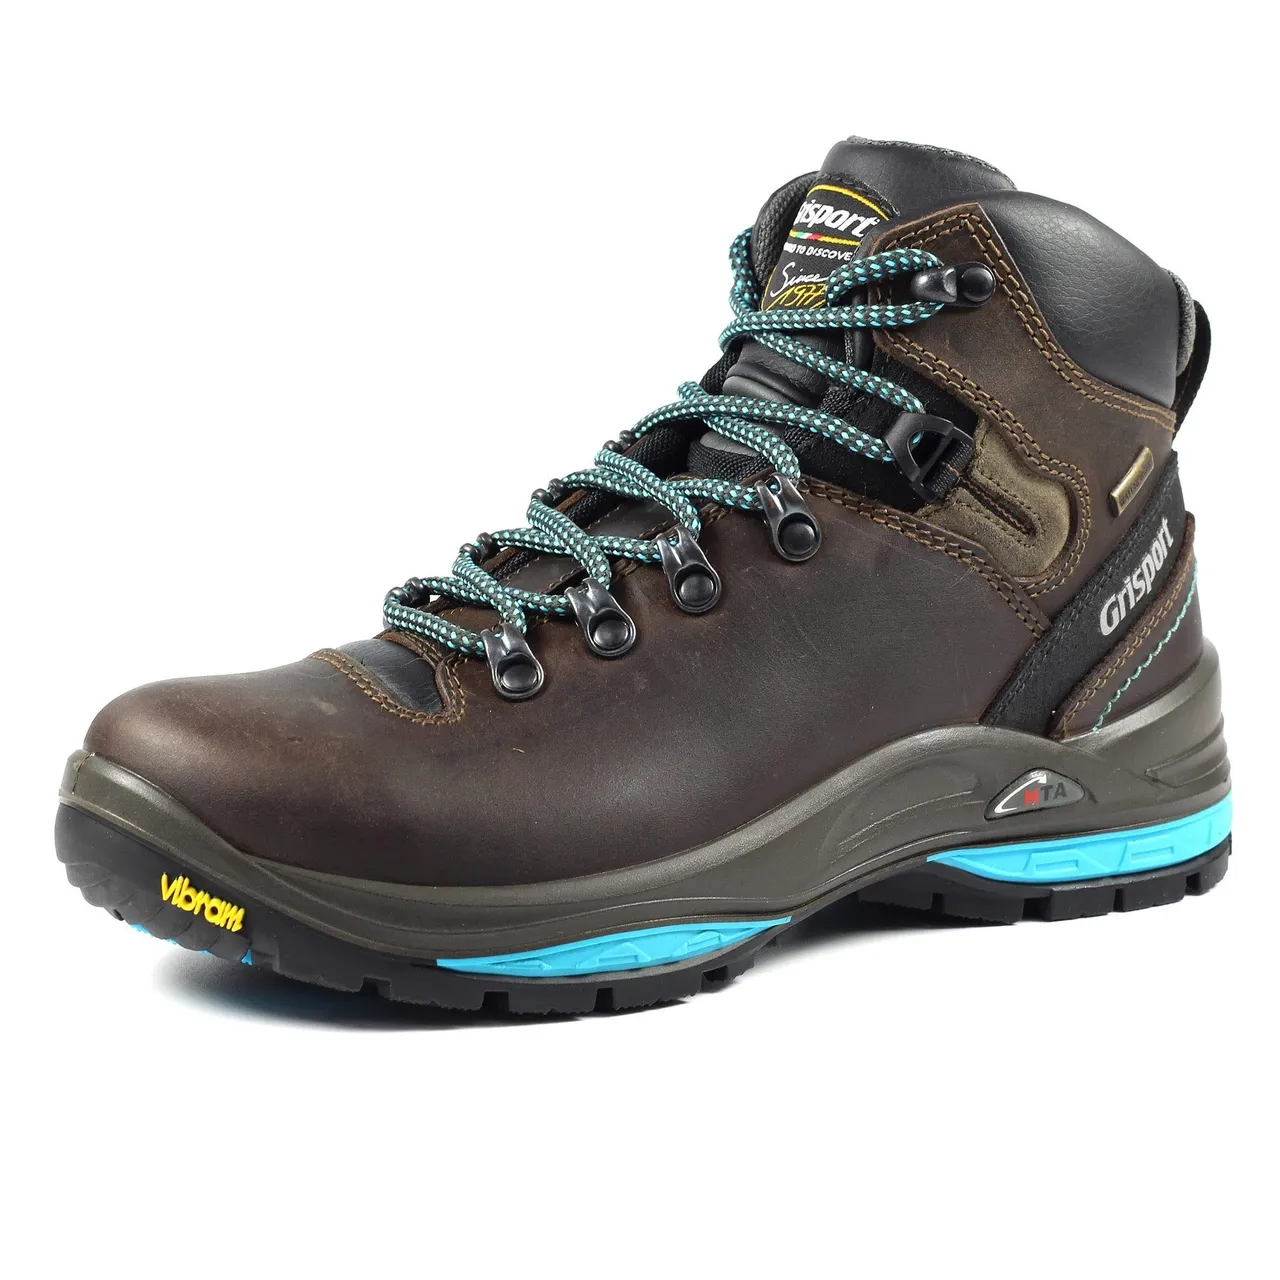 Grisport Women's Lady Glide High Rise Hiking Boots